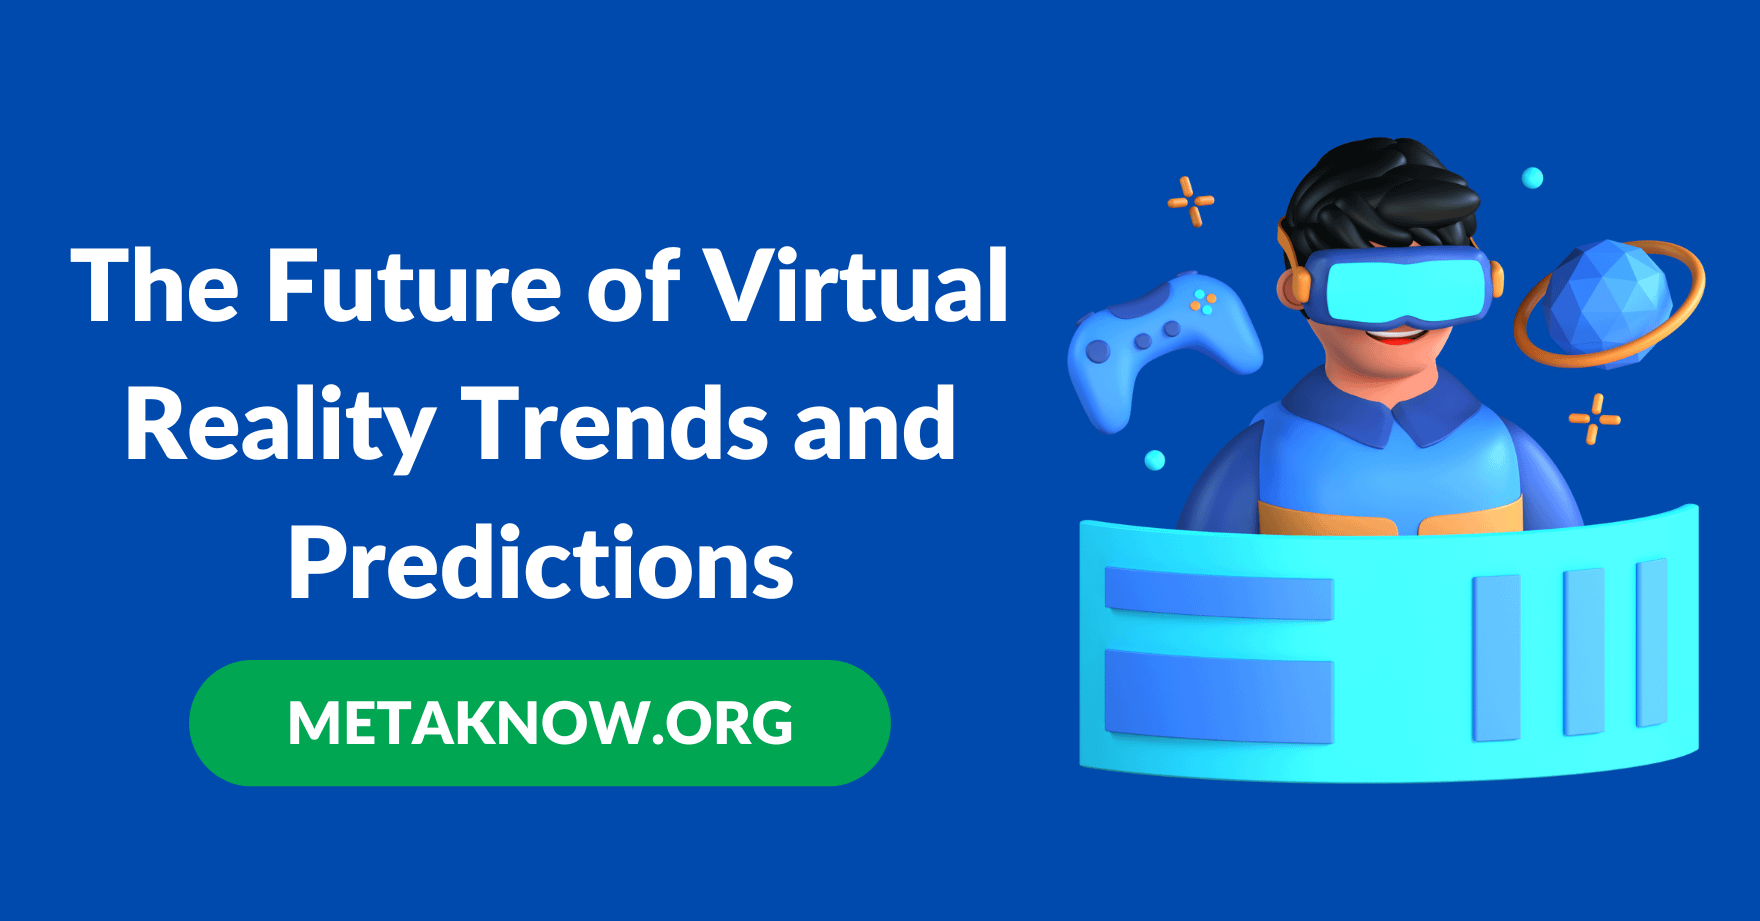 The Future of Virtual Reality Trends and Predictions